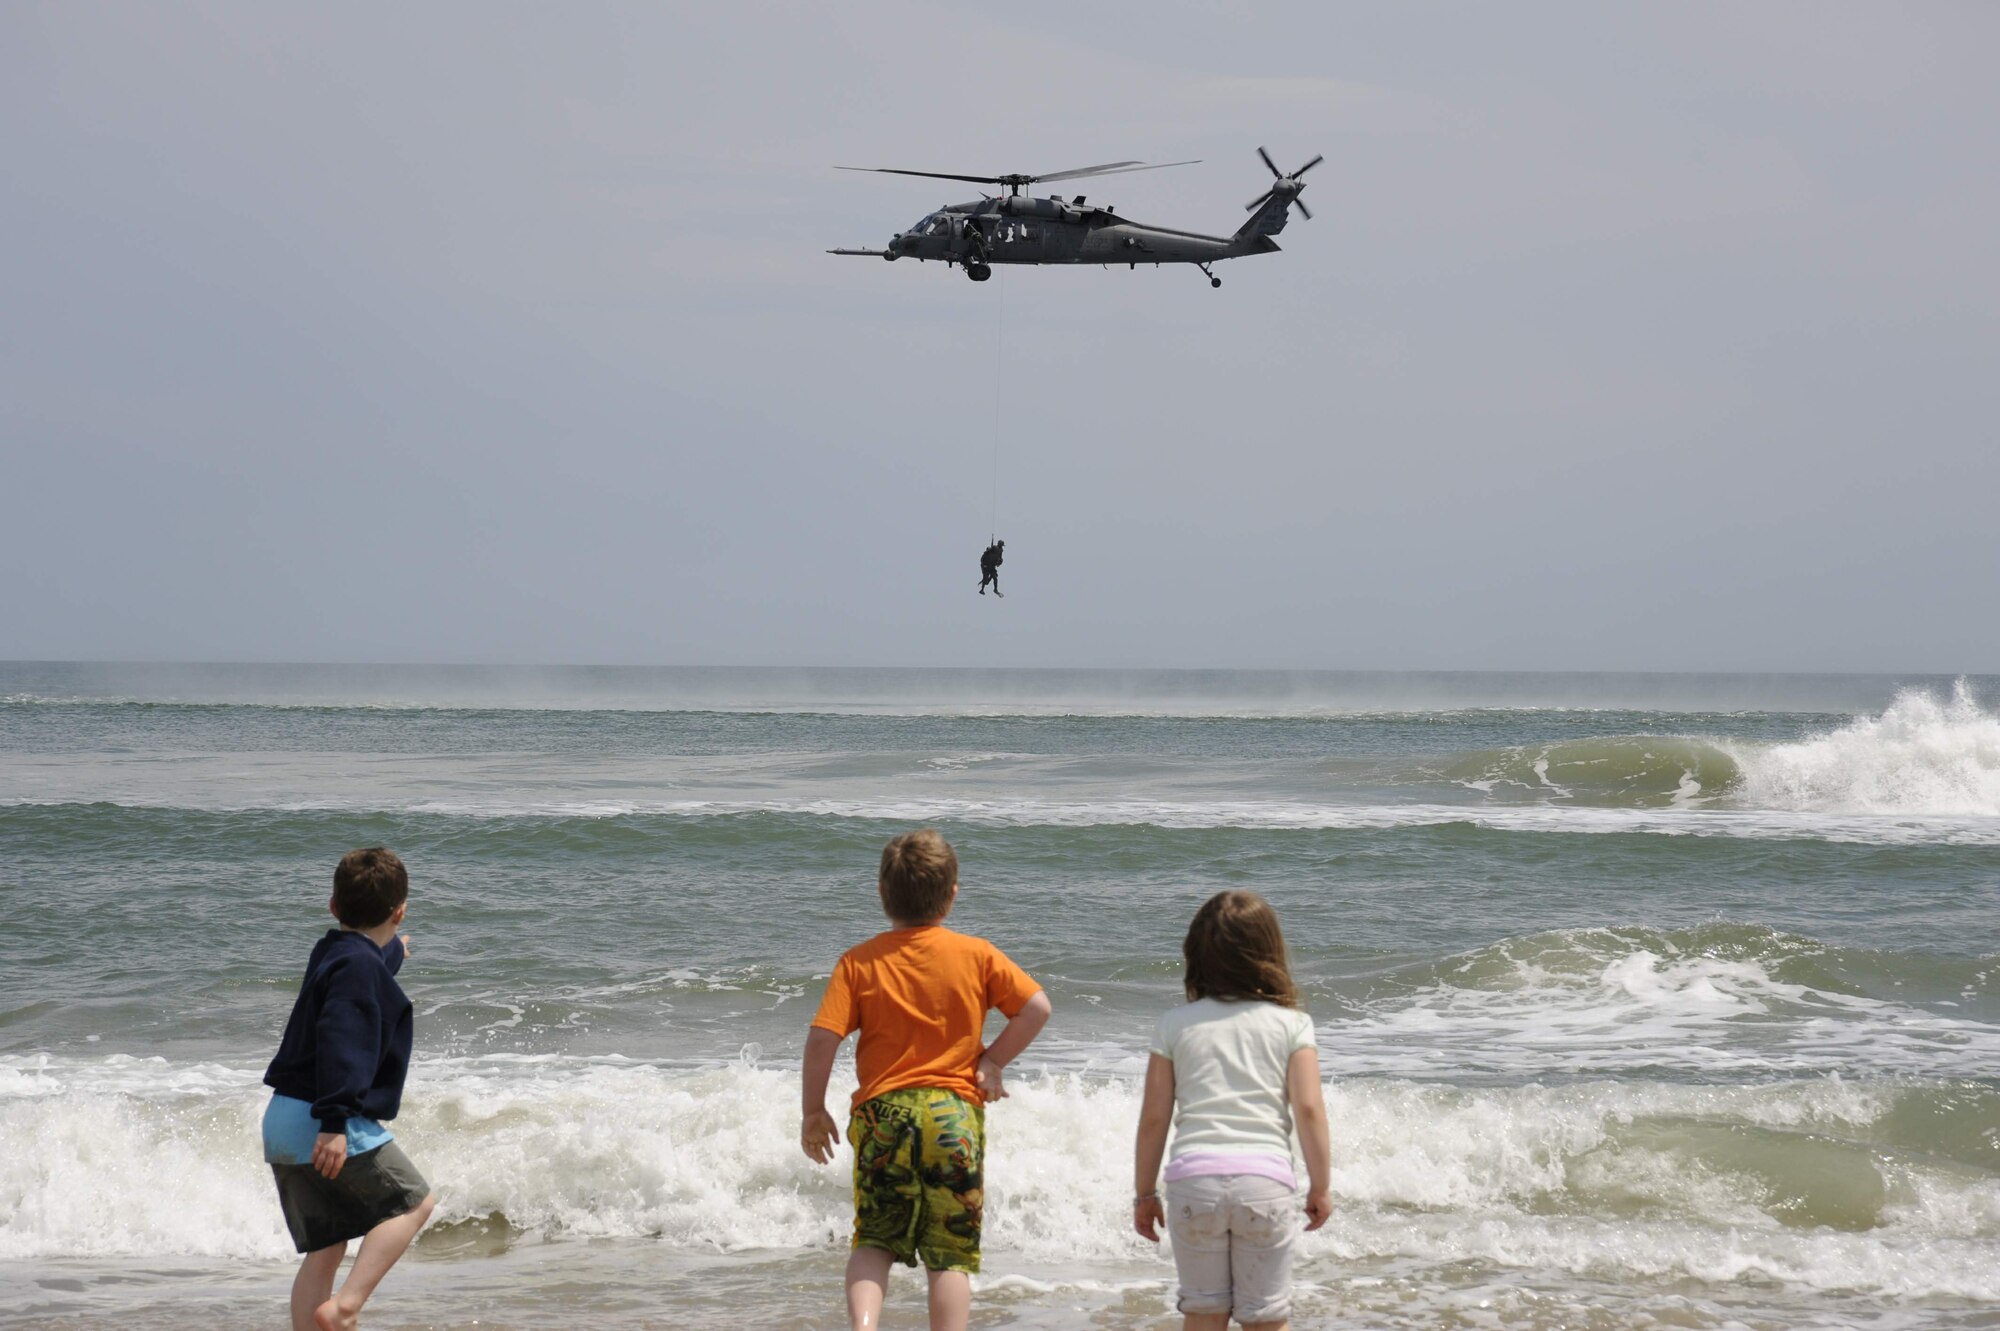 Michael Harris (left), Tyler Simmons and Elise Harris watch as a special forces team member gets reeled into an HH-60 Pave Hawk helicopter during a joint airpower demonstration as part of Air Force Week April 22 along the coastline of Virginia Beach, Va.  (U.S. Air Force photo)
